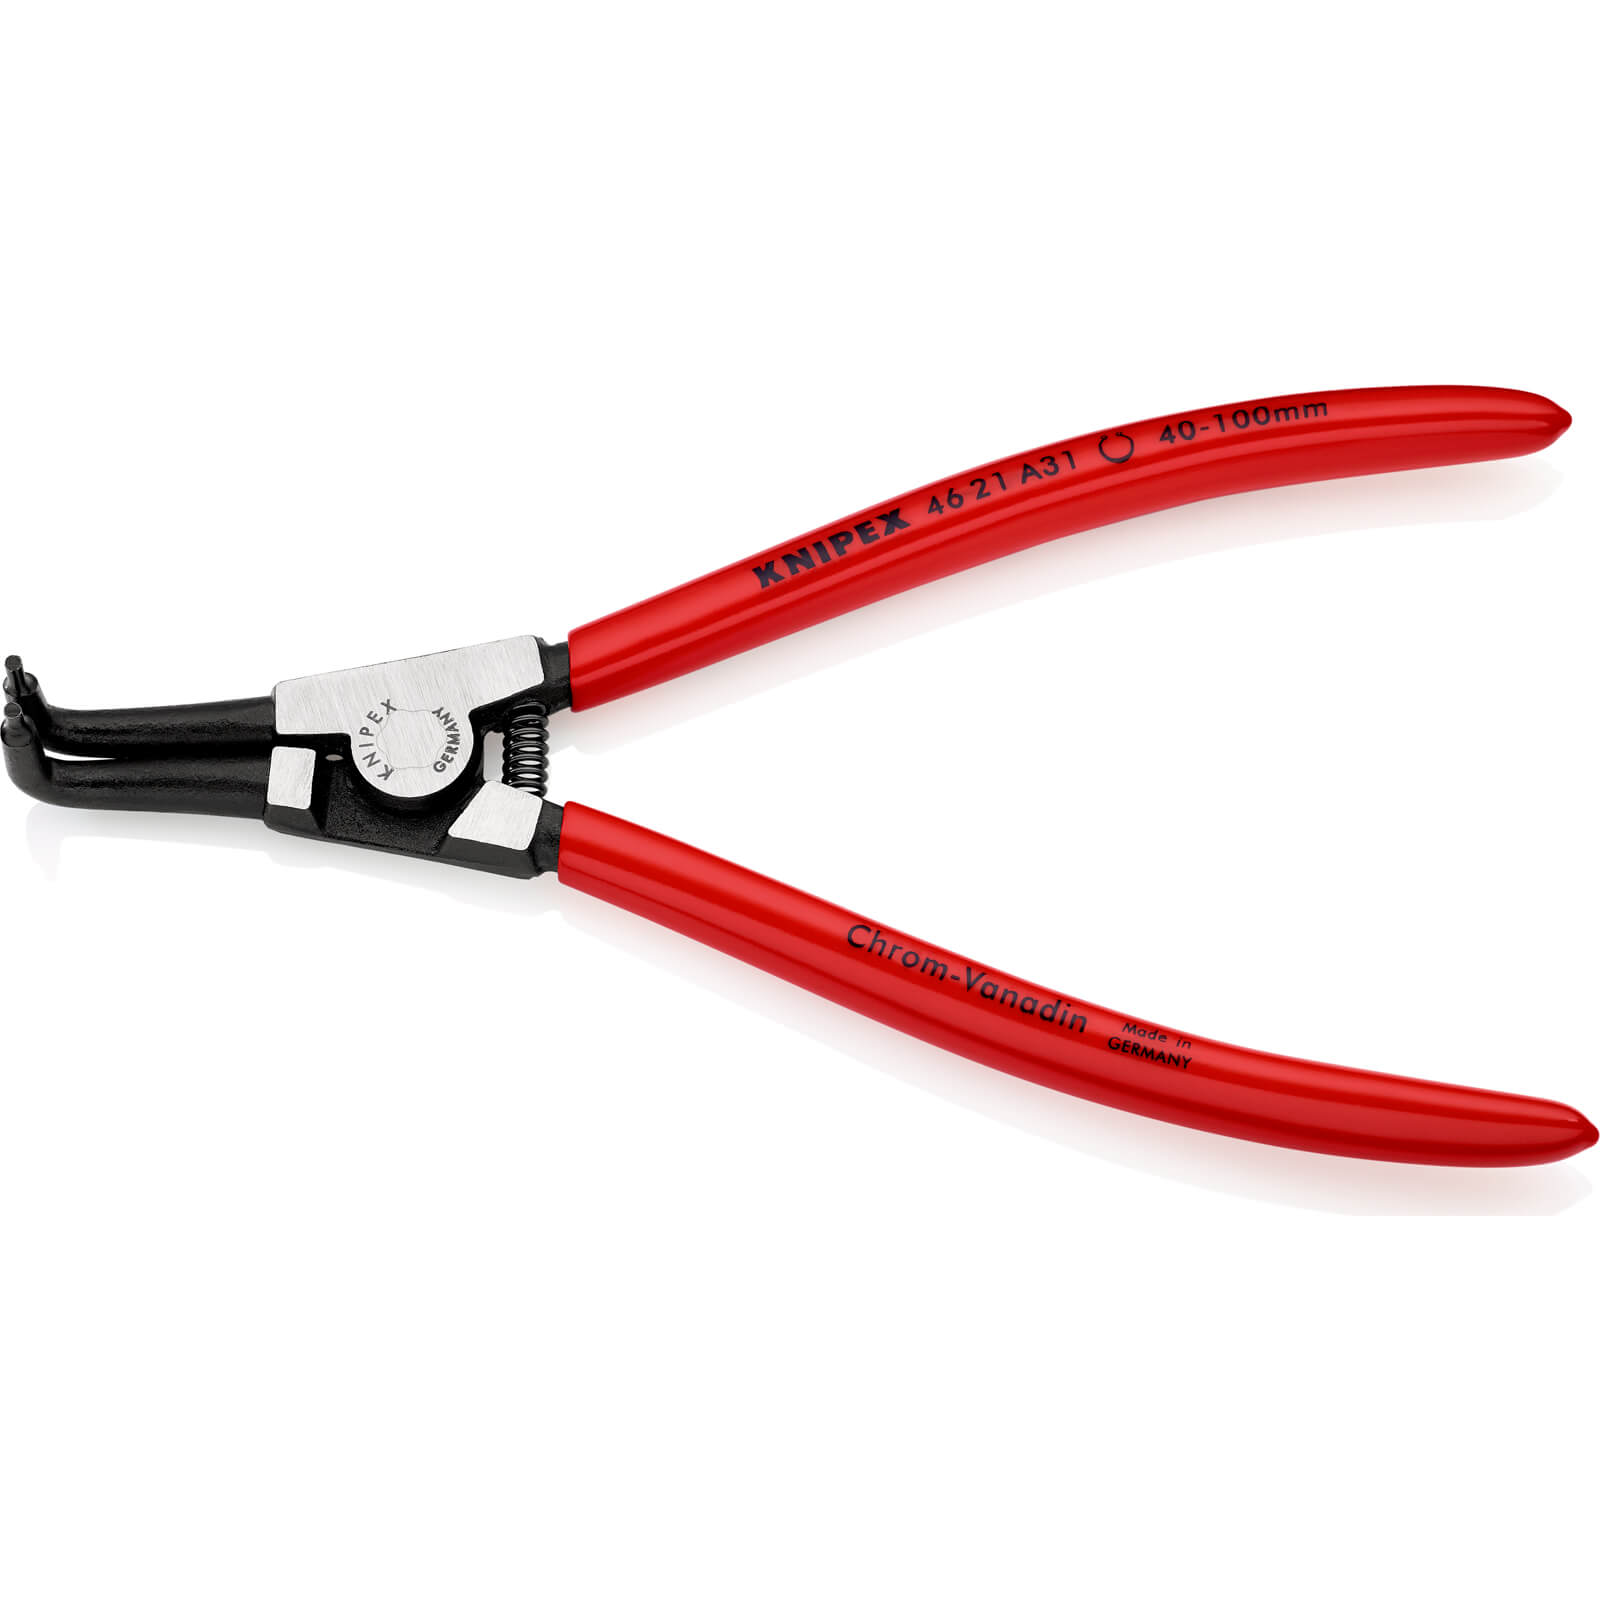 Image of Knipex 46 21 External 90 Degree Circlip Pliers 40mm - 100mm